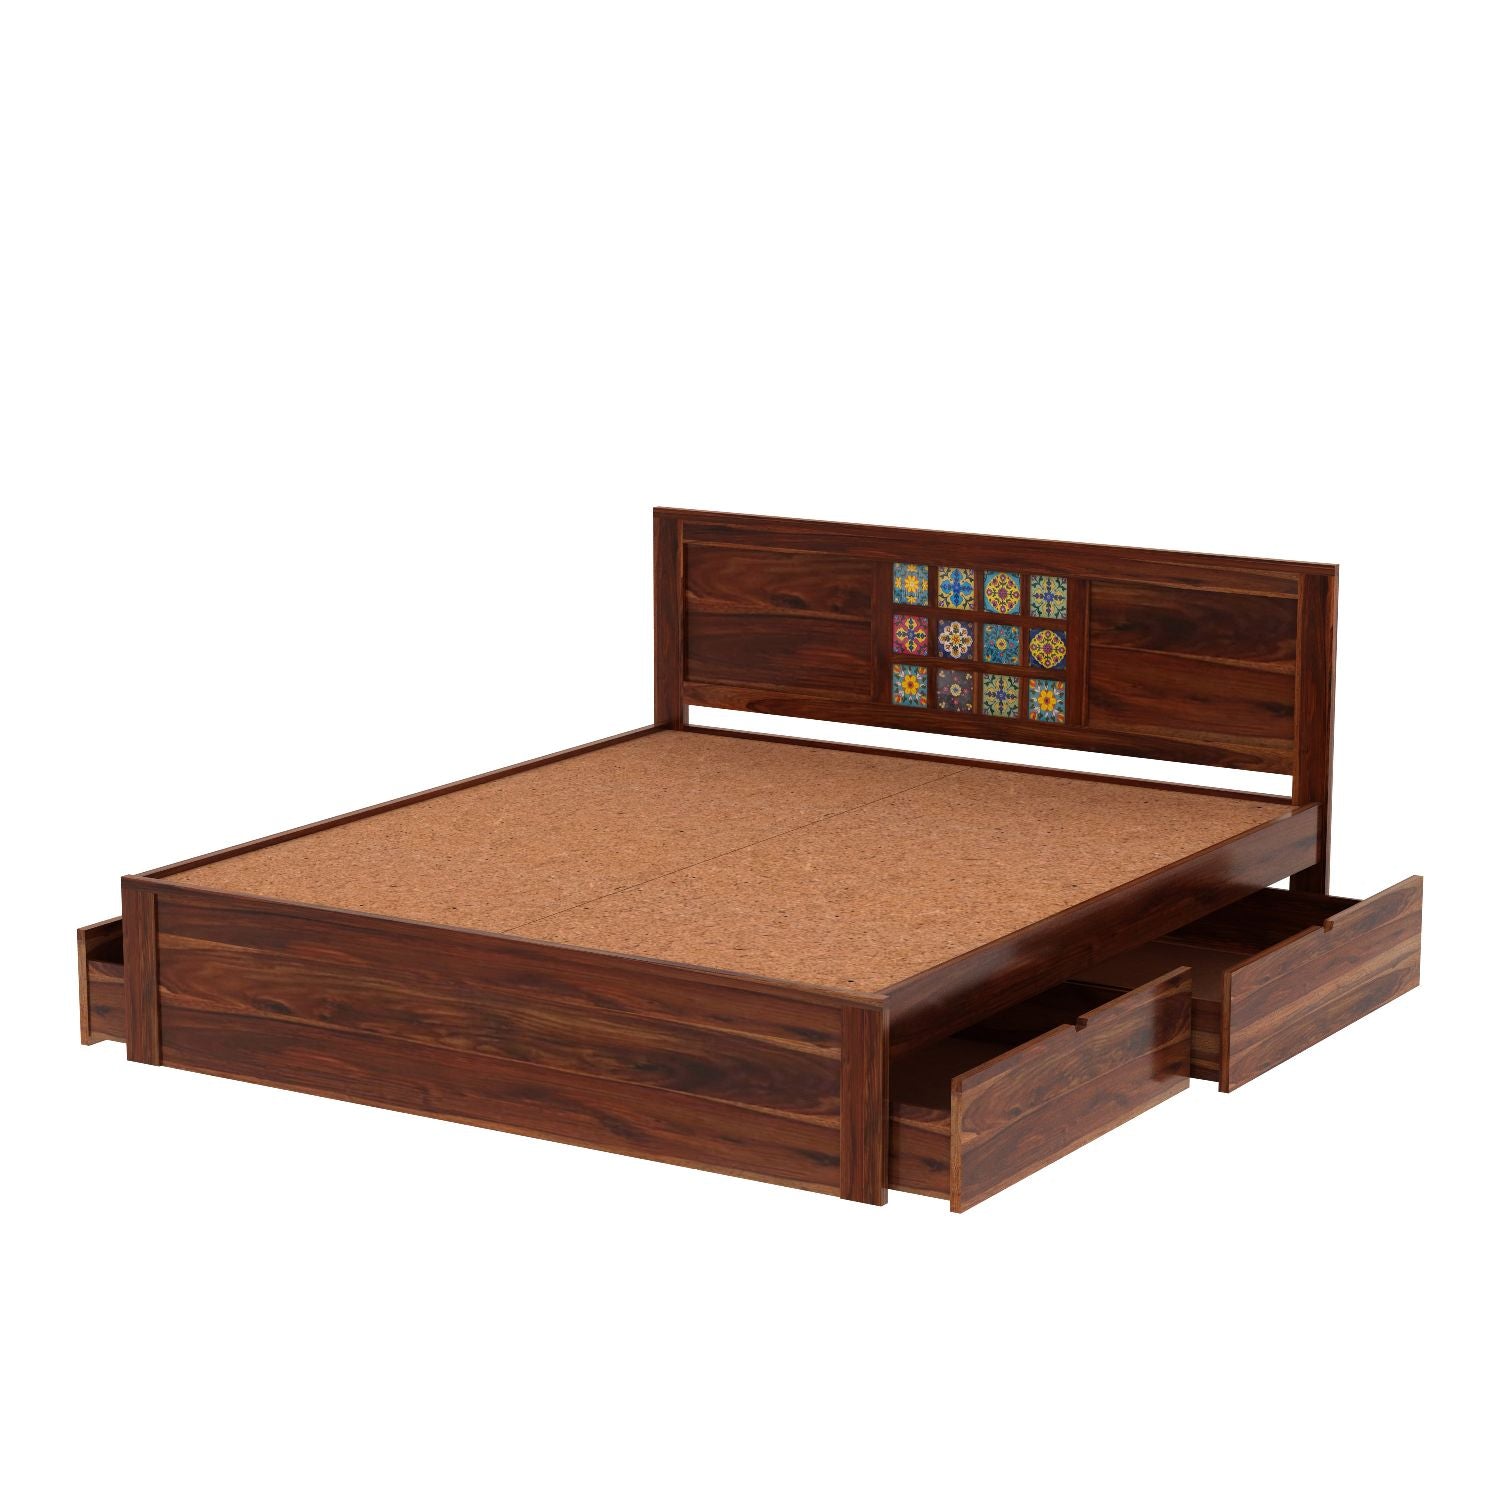 Dotwork Solid Sheesham Wood Bed With Four Drawers (King Size, Natural Finish)